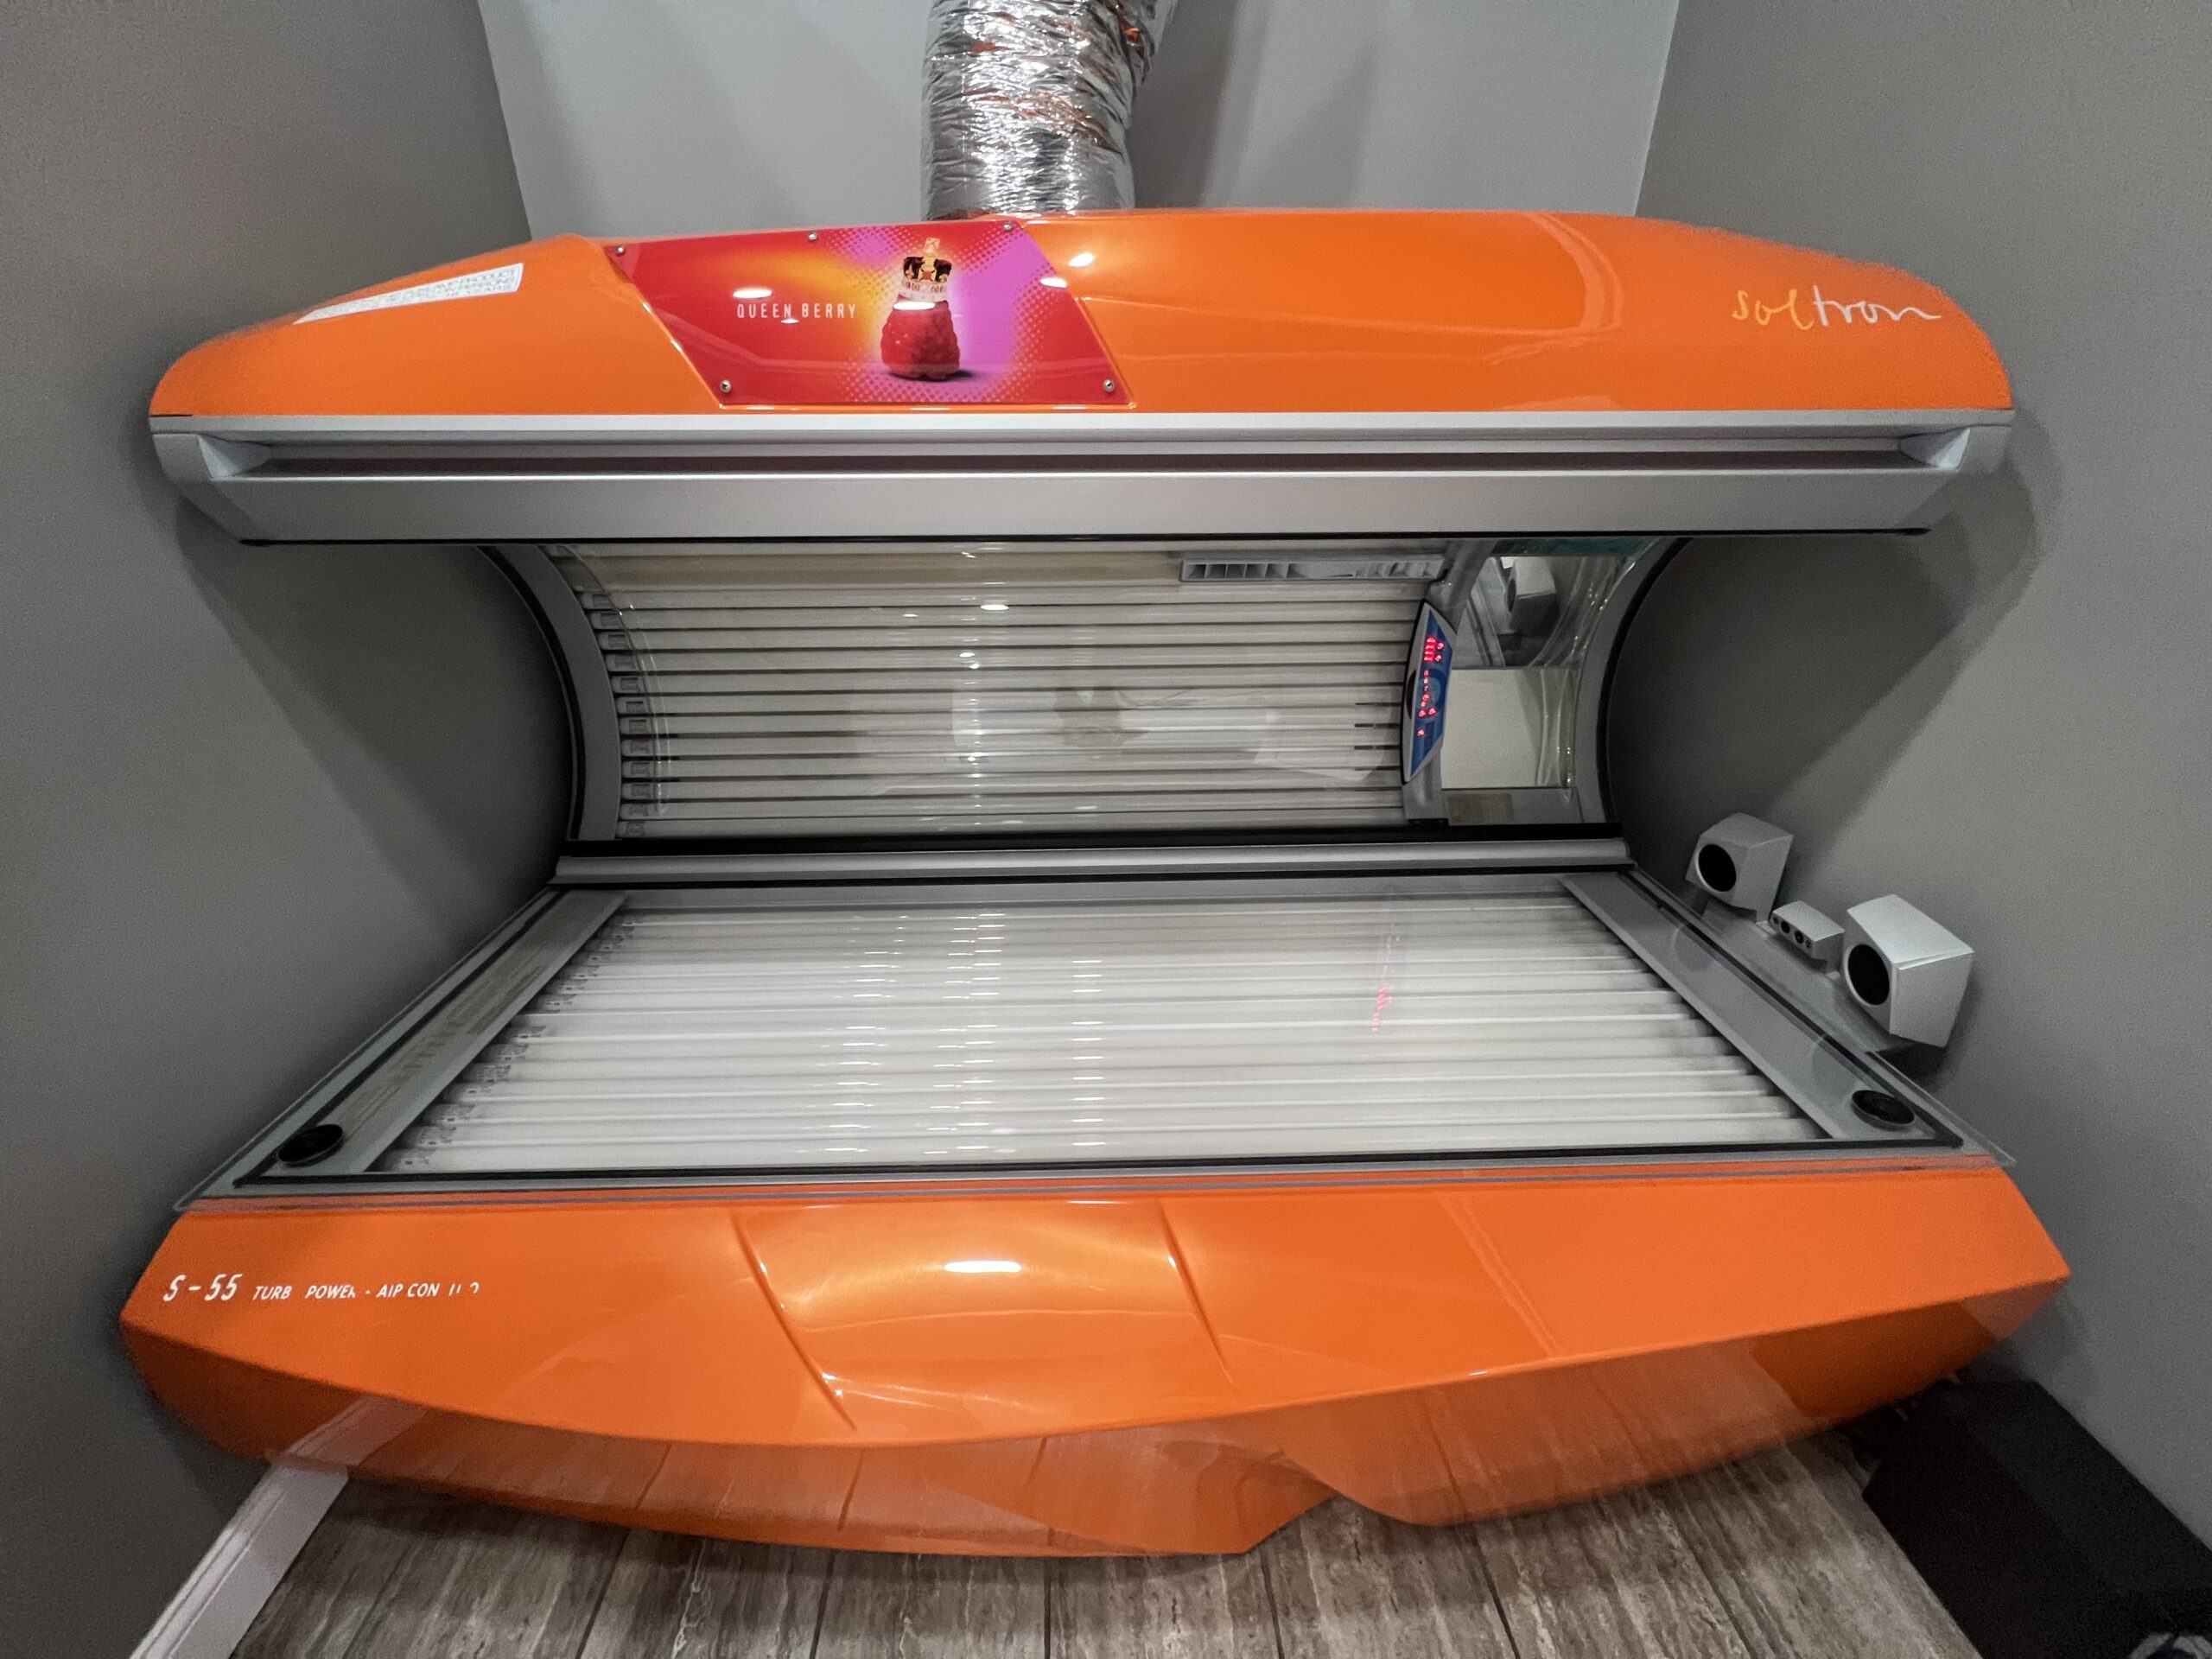 Stylish Soltron S-55 Queen Berry tanning bed at Key Largo Tan & Spa, East Alton, IL, combining aesthetics with effective tanning features.